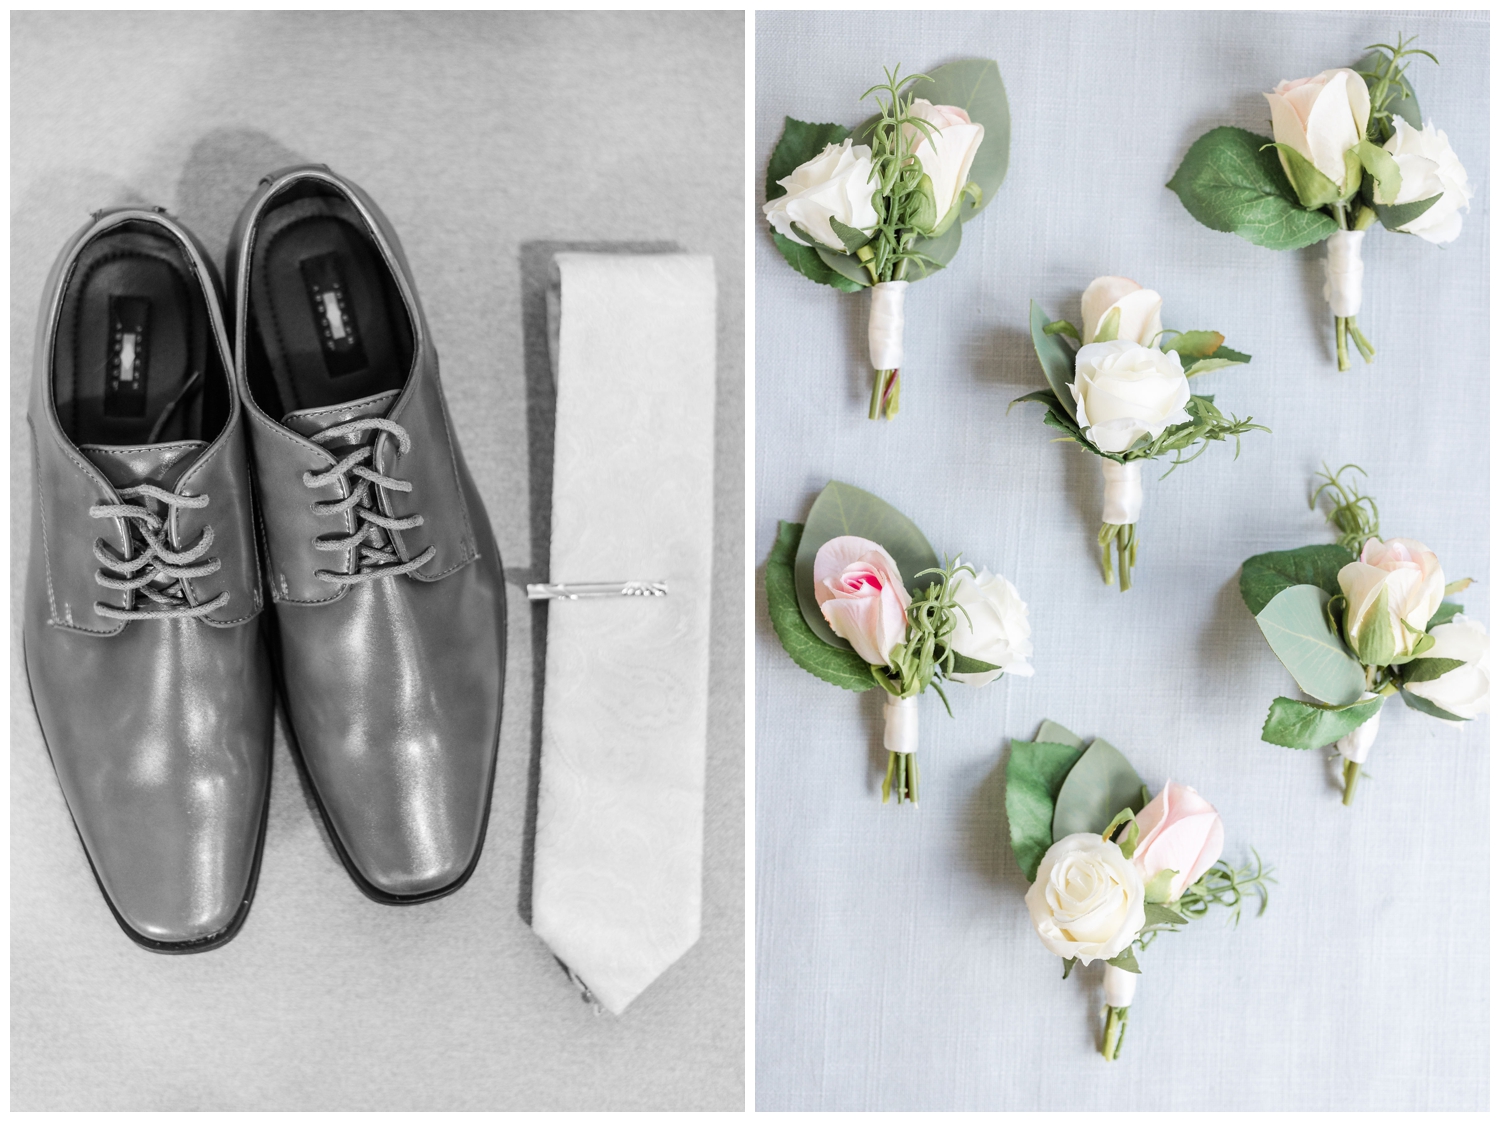 groom details shoes, ties and boutonierre